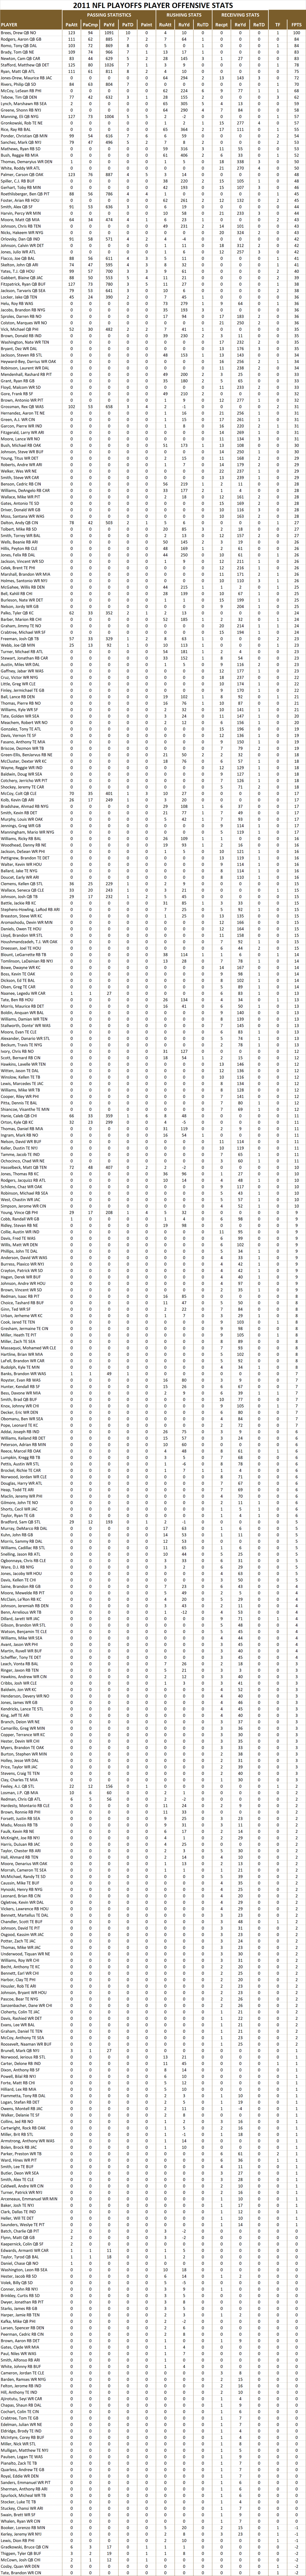 2011 National Football League Pool Playoff Player Offensive Stats